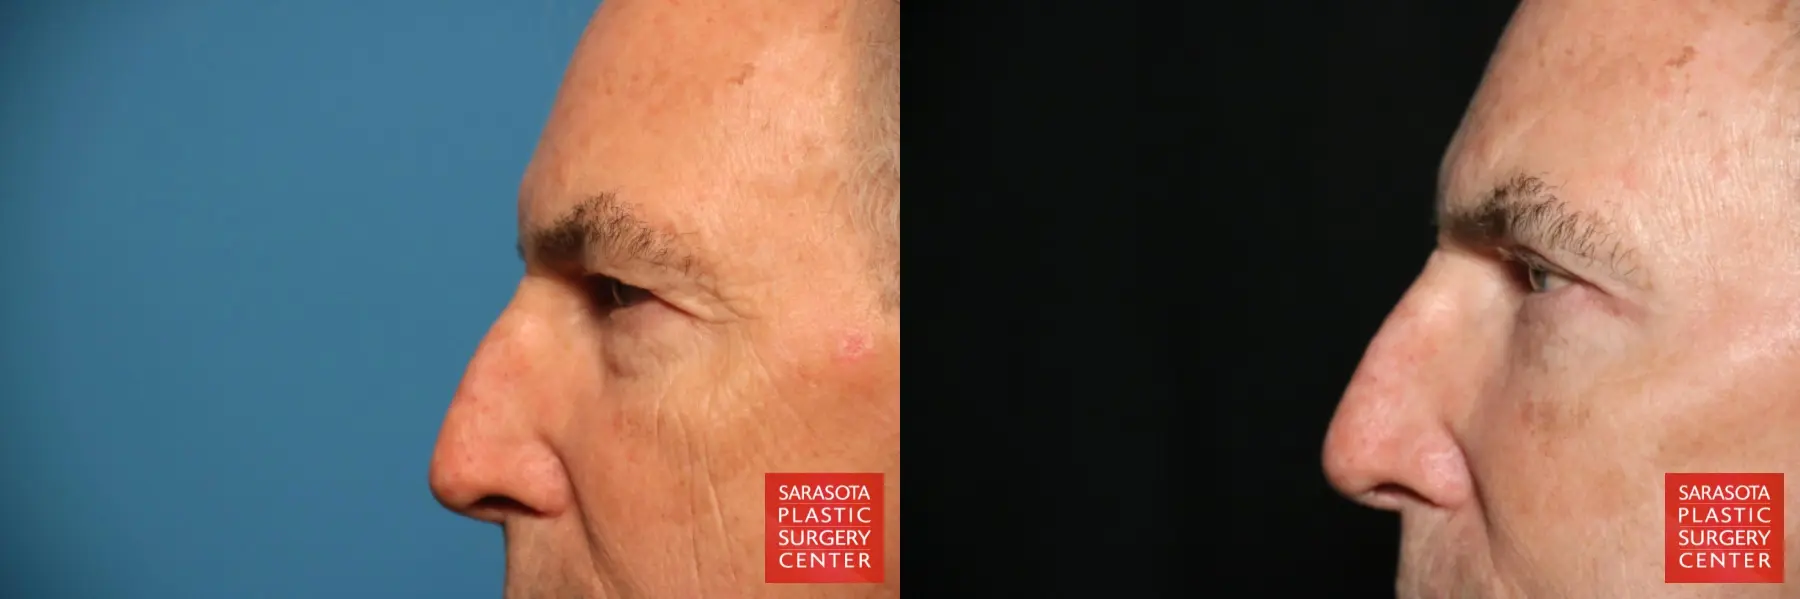 Eyelid Surgery: Patient 7 - Before and After 5